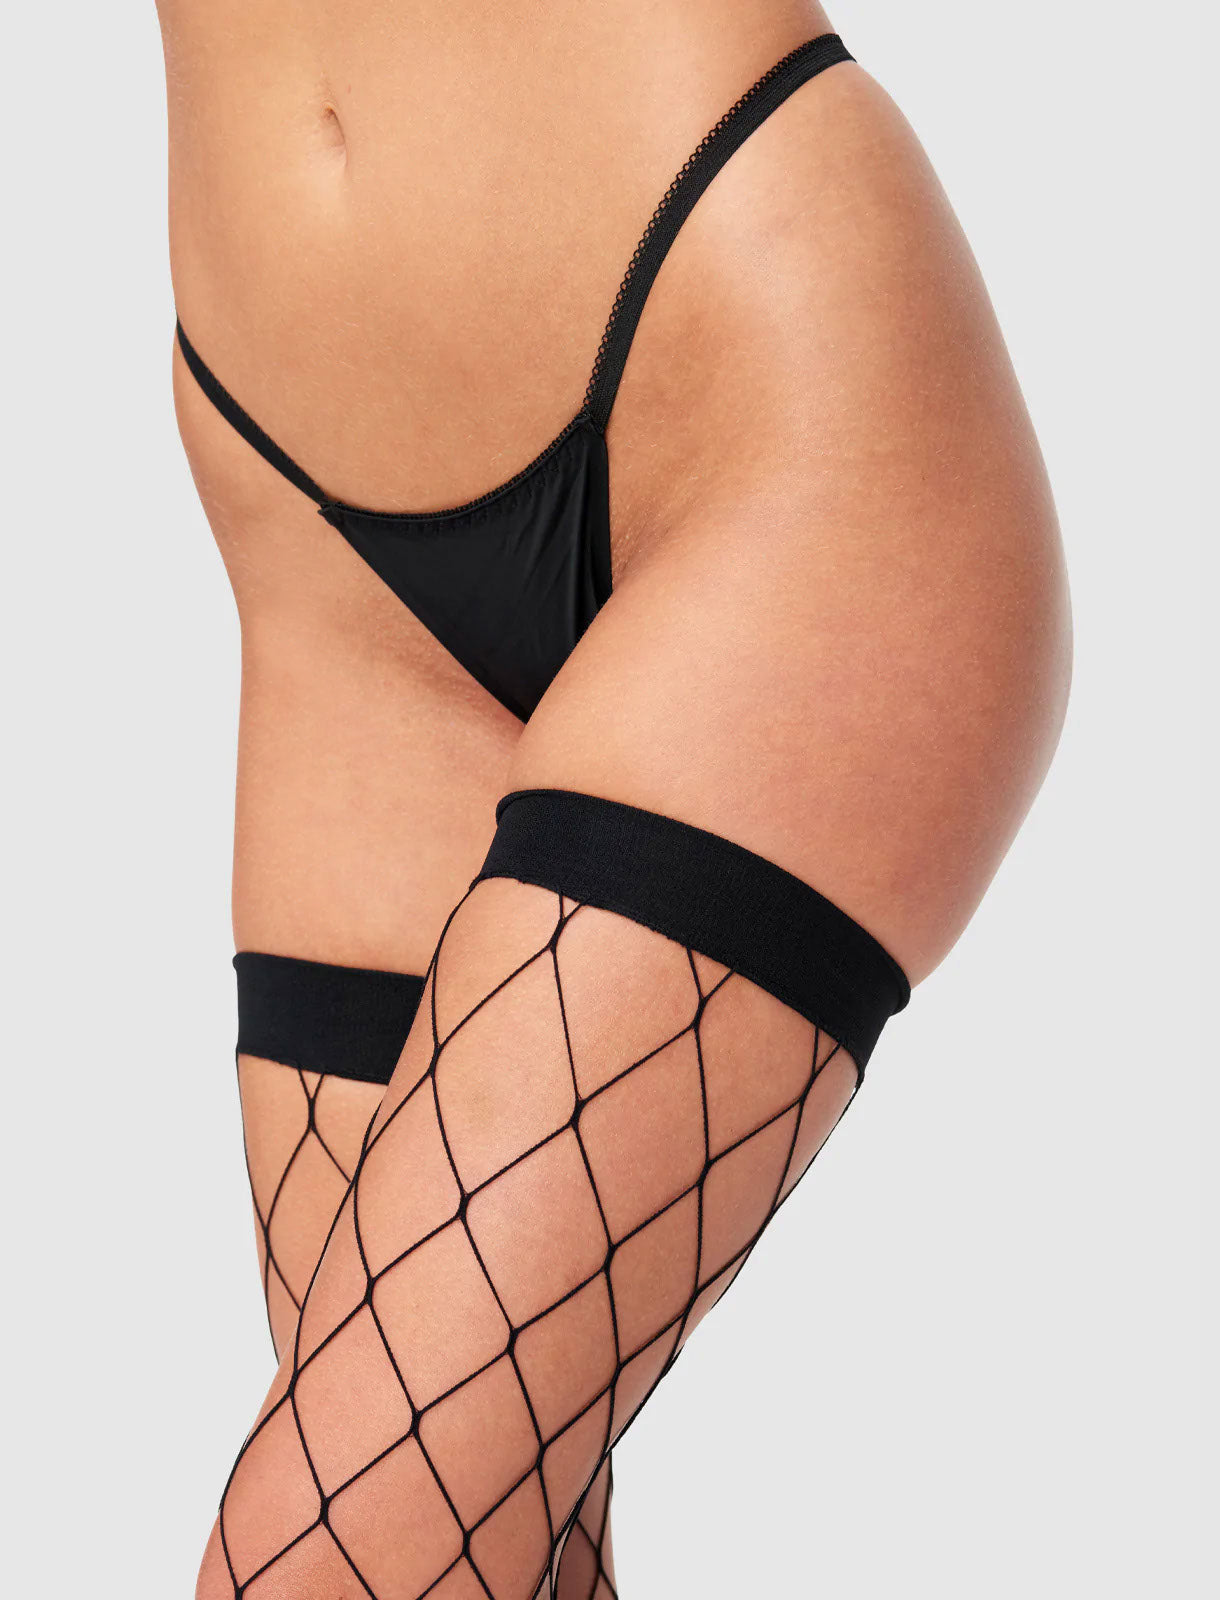 All Netted Up Thigh Highs - Fredericks of Hollywood